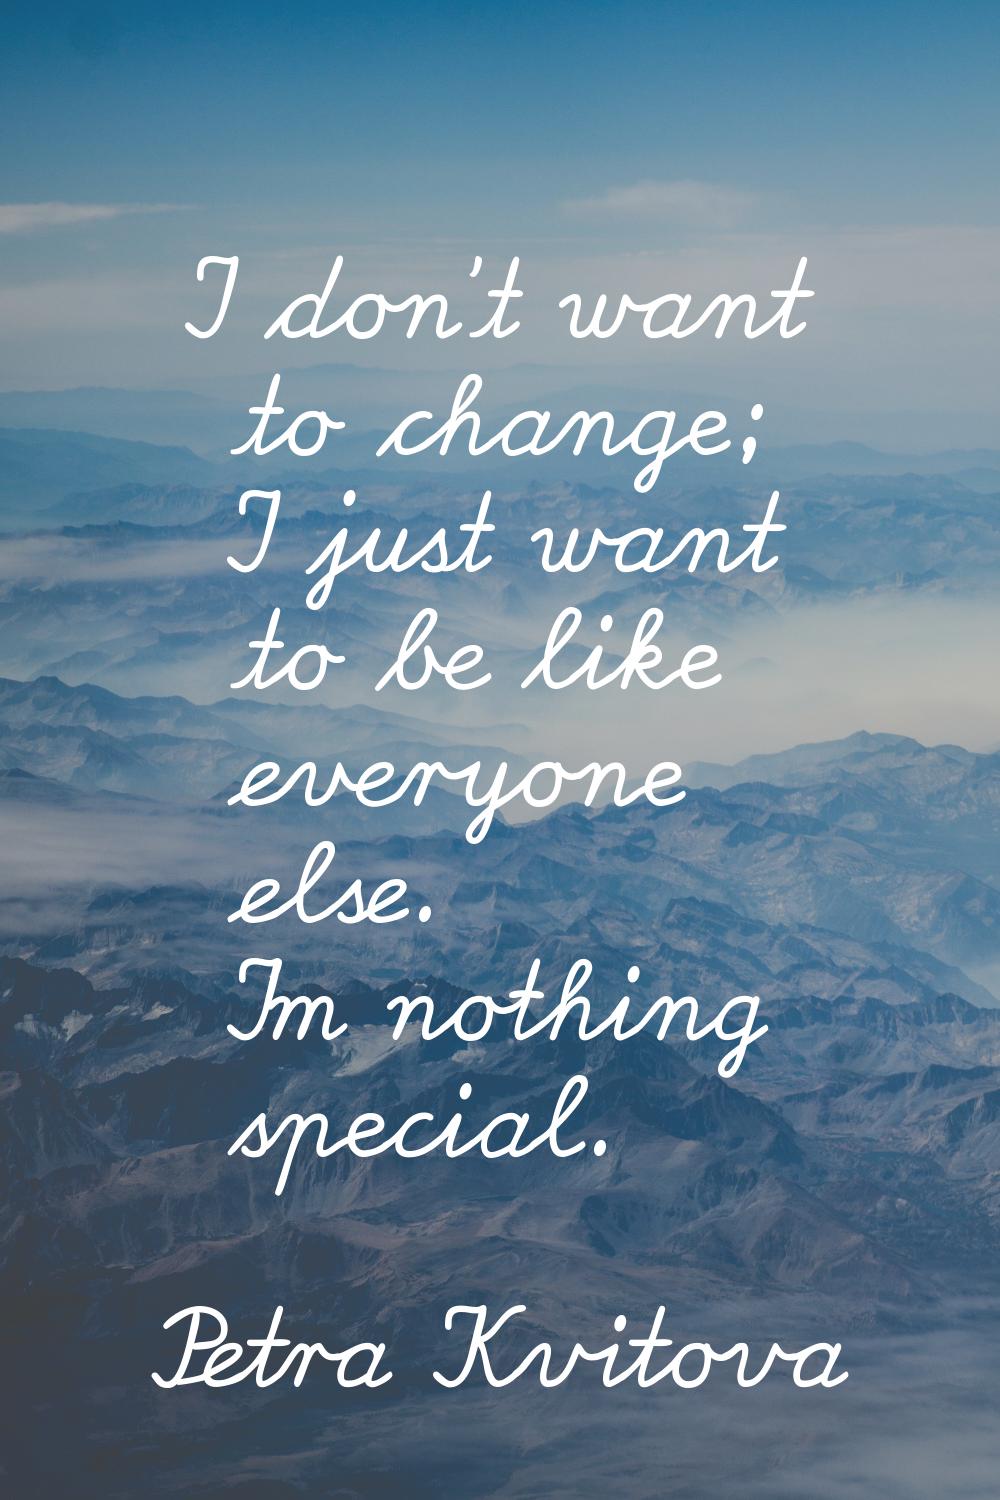 I don't want to change; I just want to be like everyone else. I'm nothing special.